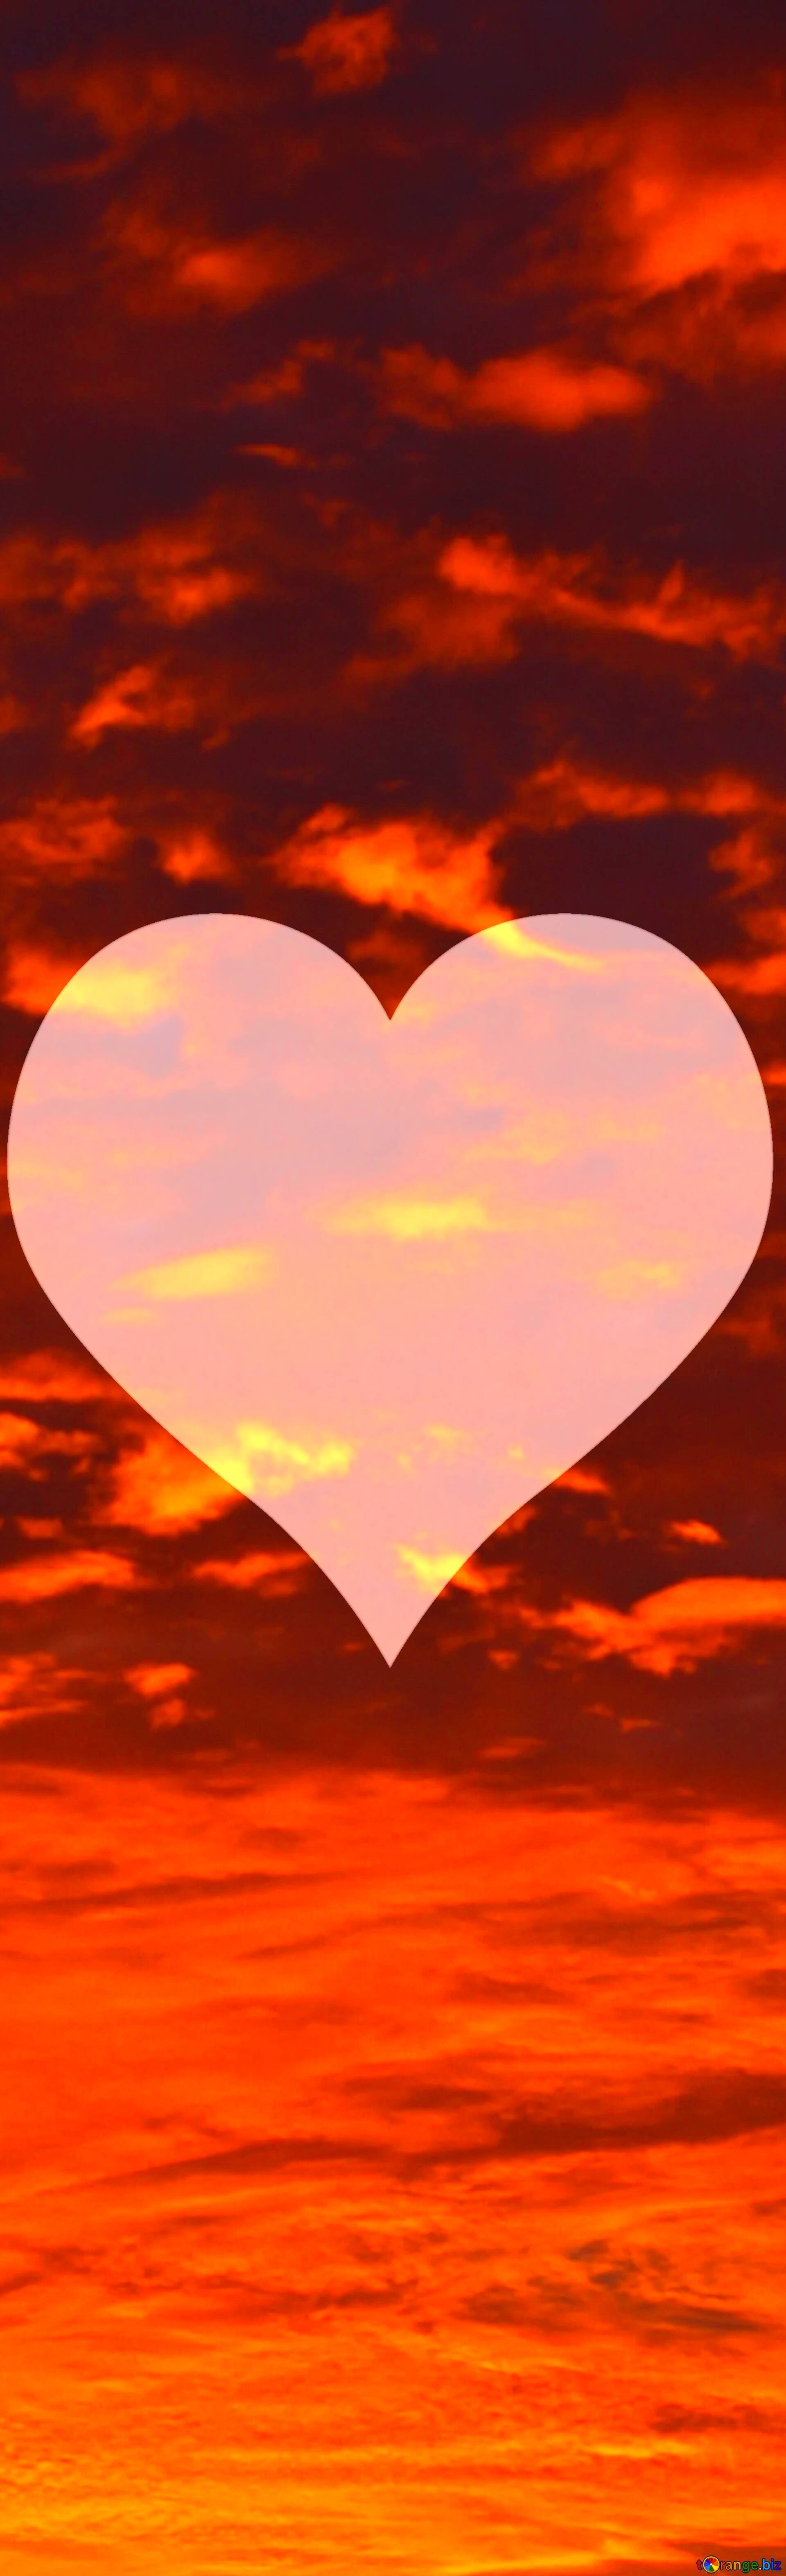 Download free picture Red sunset Love Heart banner background on CC-BY  License ~ Free Image Stock  ~ fx №176278